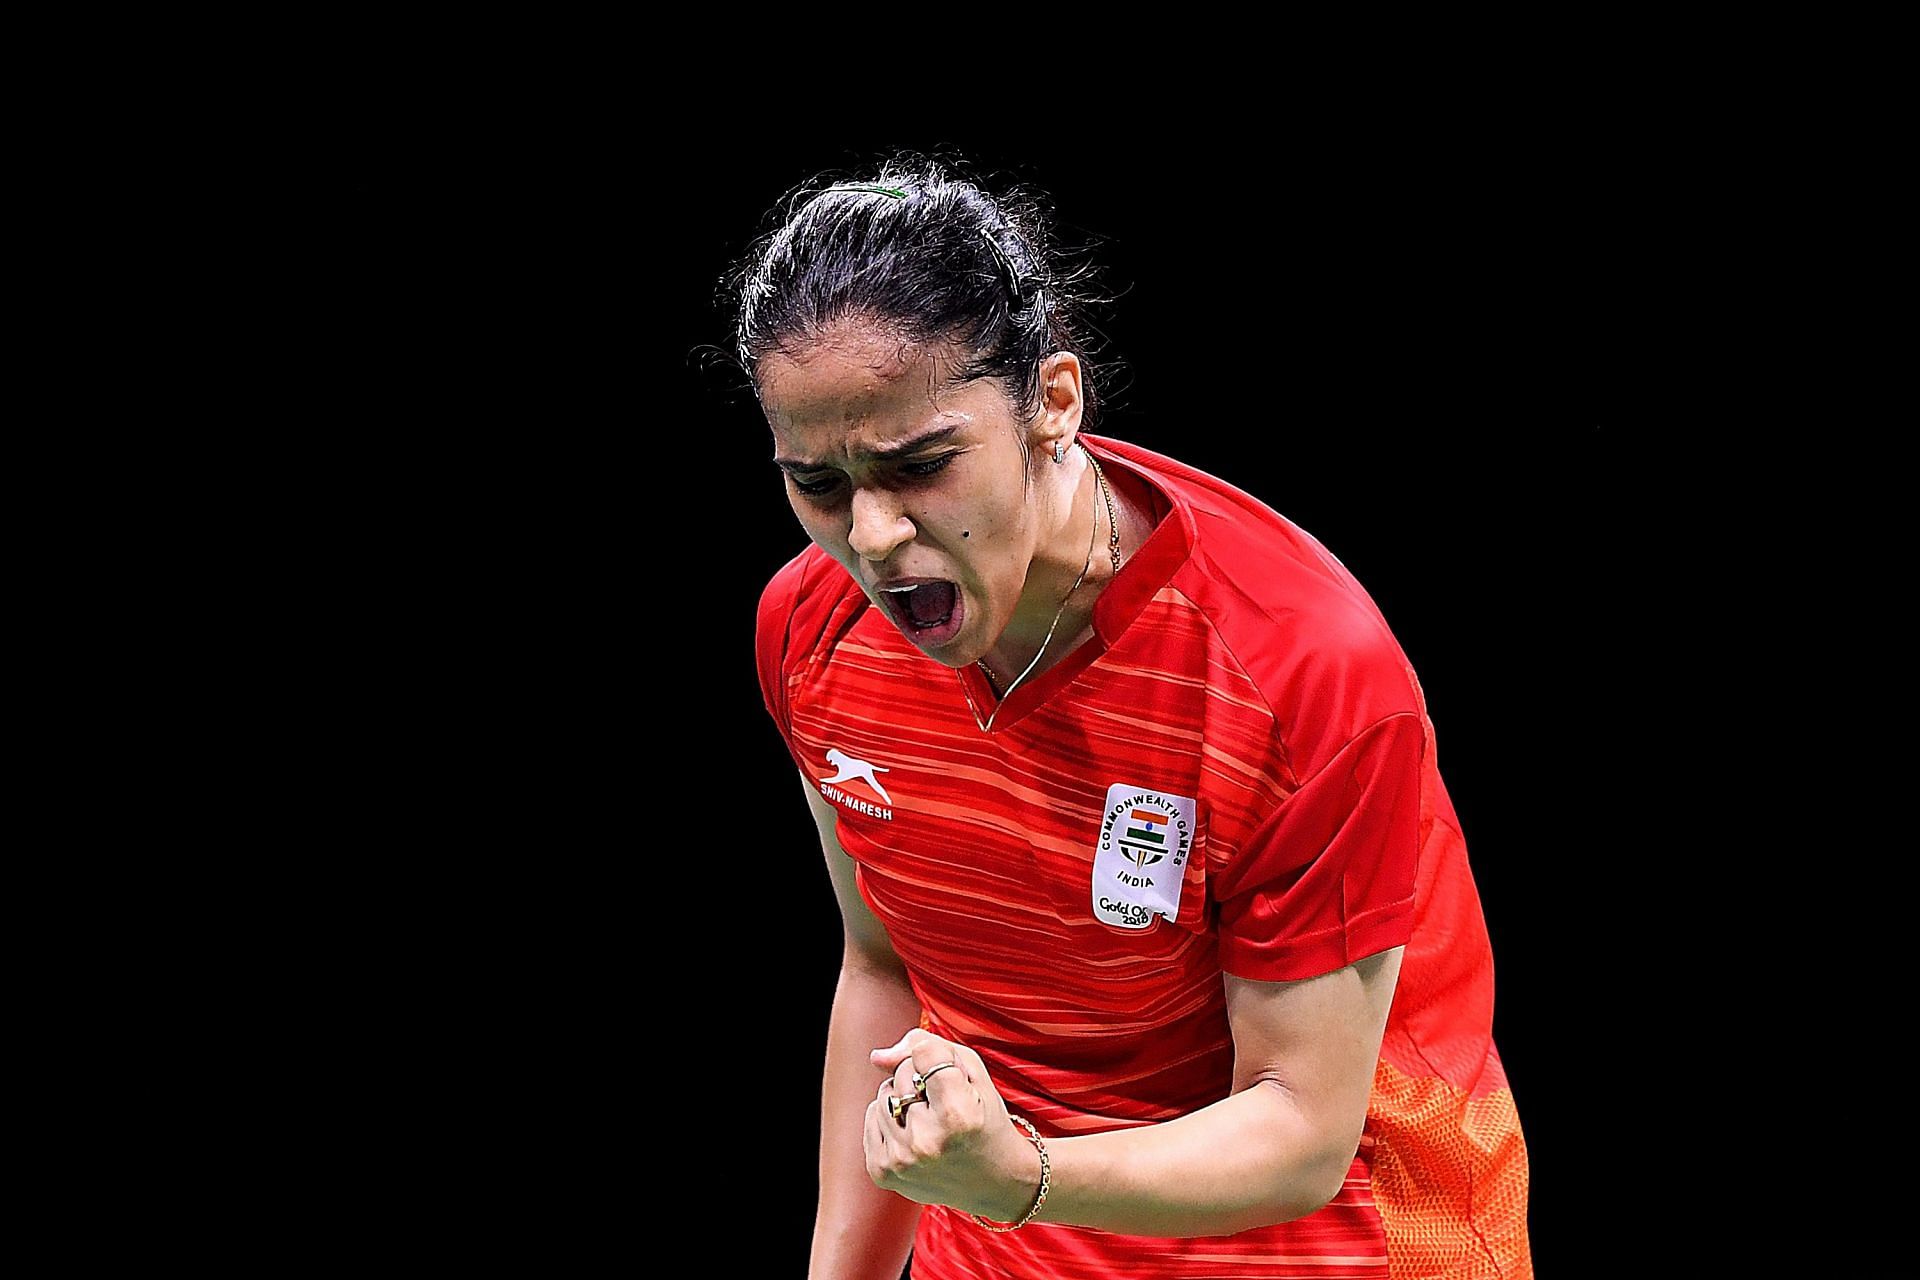 Saina Nehwal in action at the 2018 Commonwealth Games. (Image courtesy: Getty)